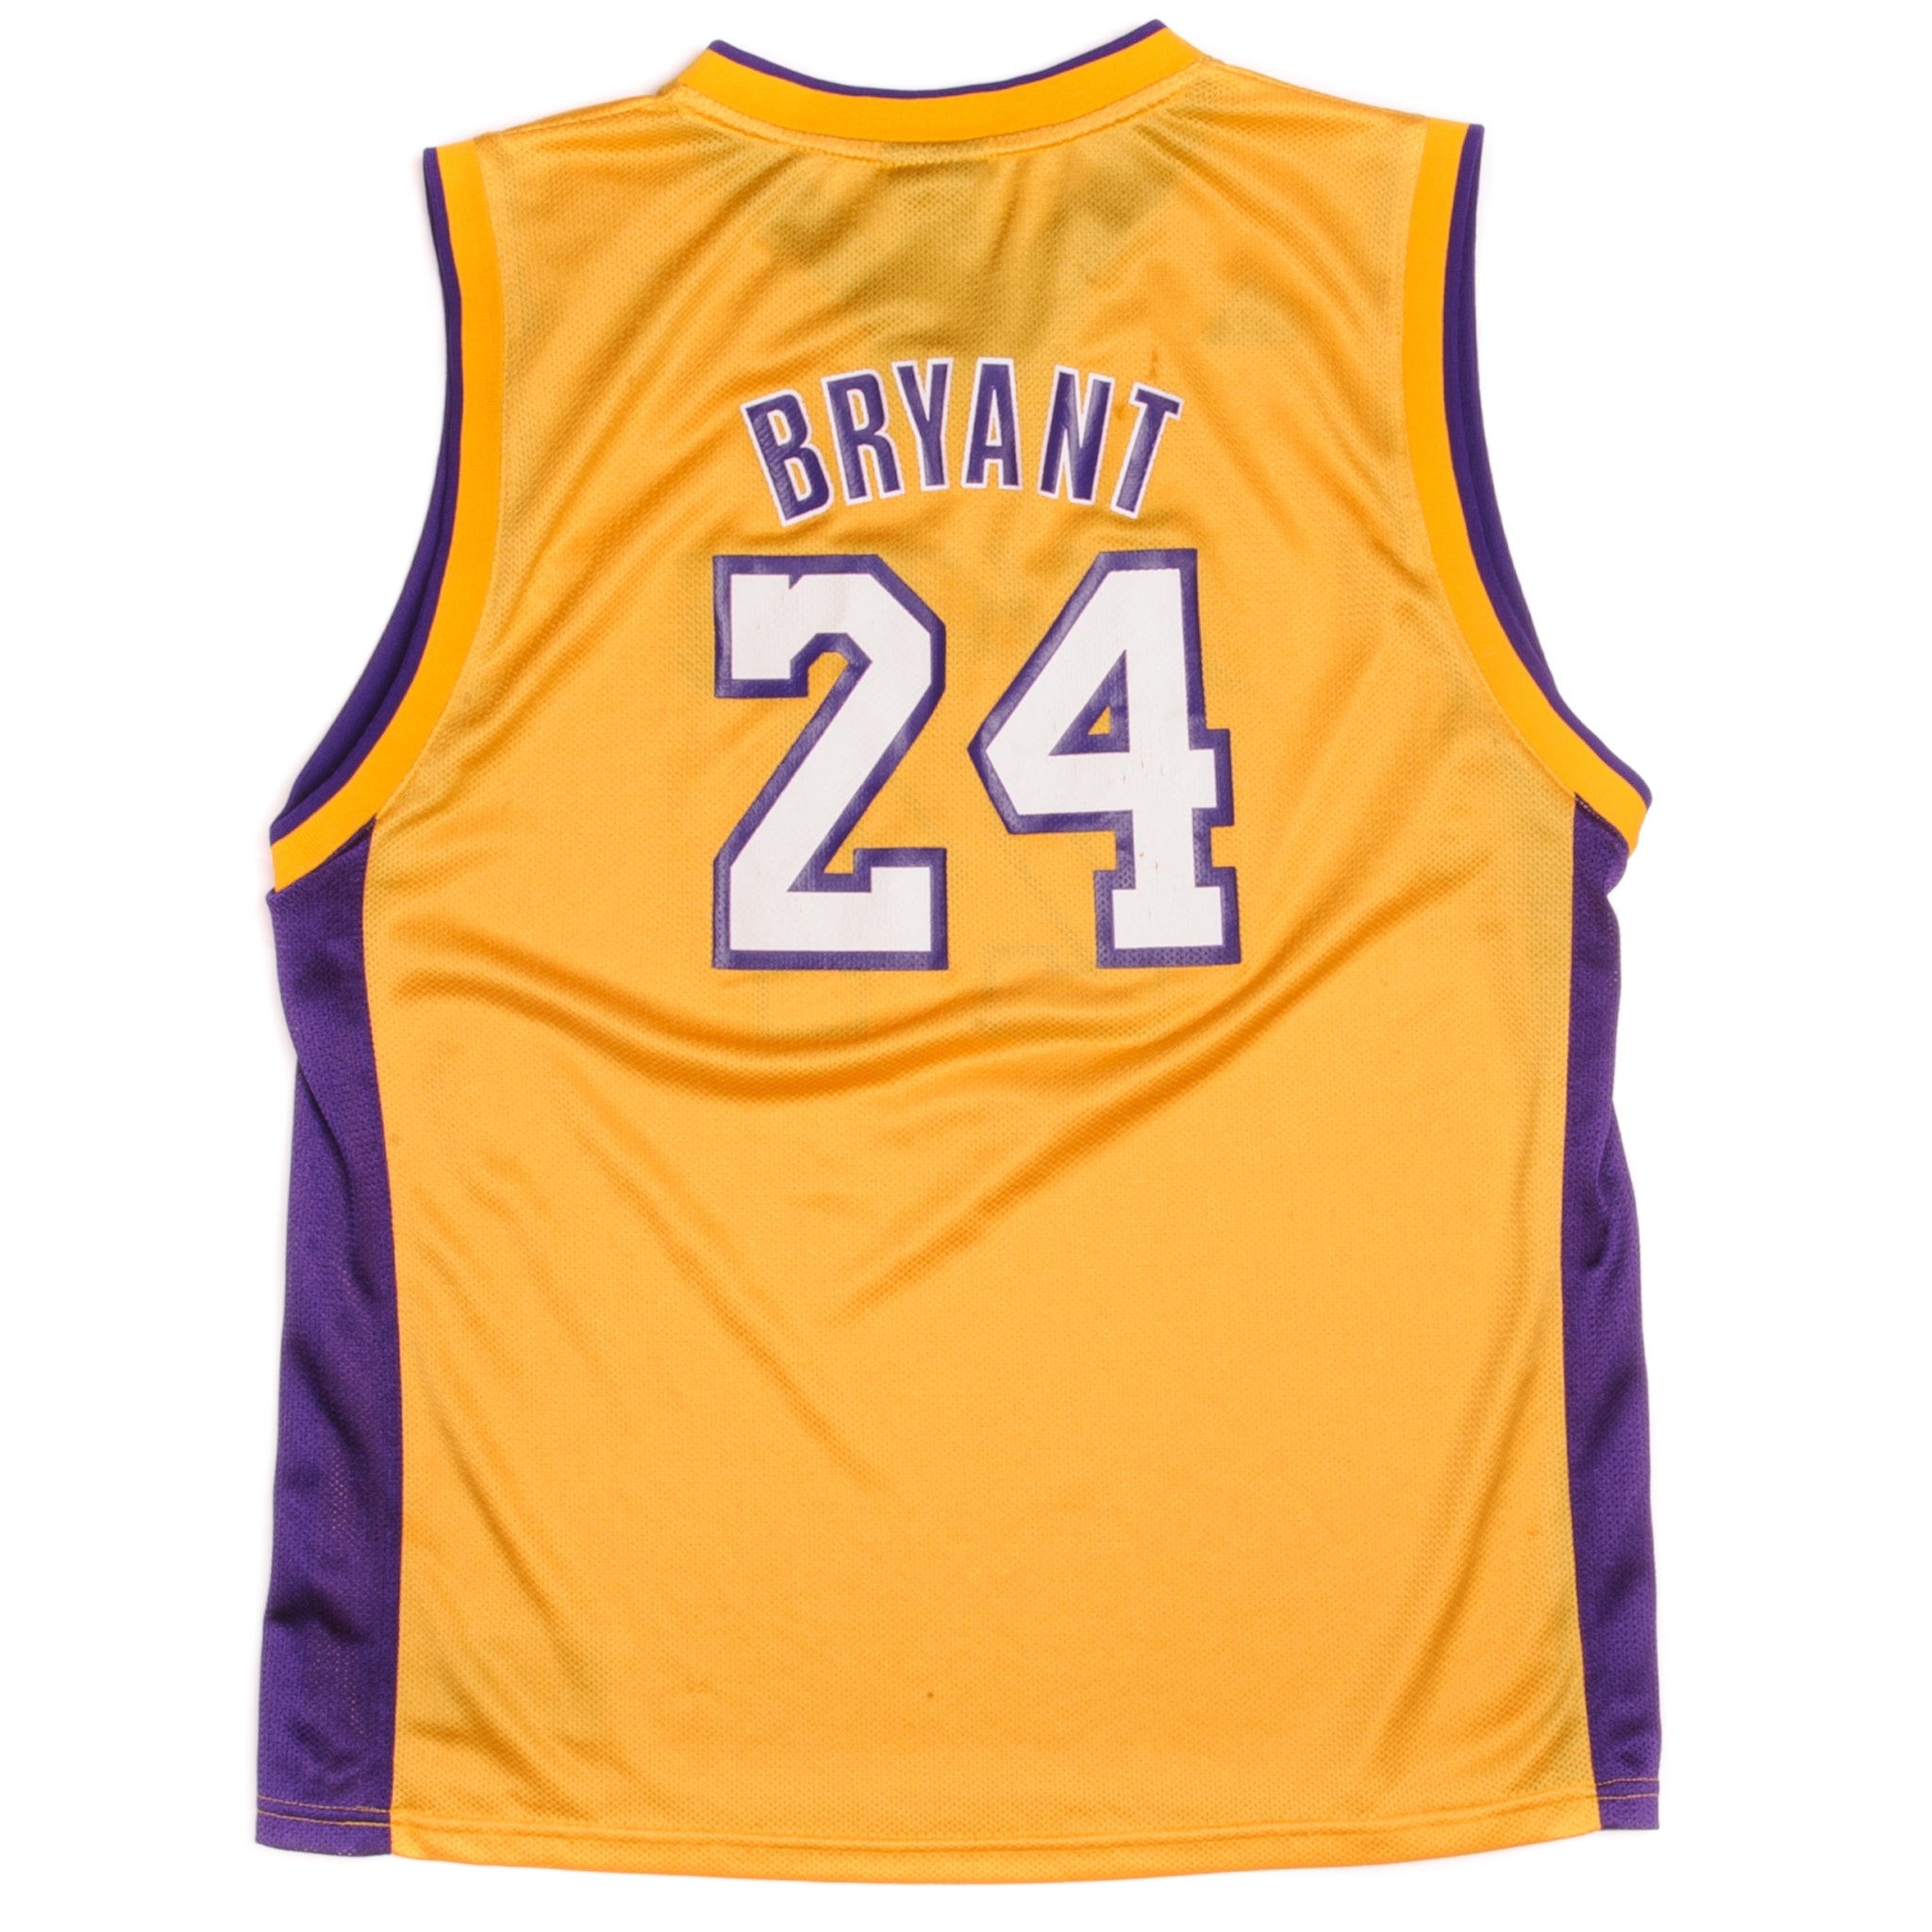 Basketball Jersey Lakers Kobe Bryant #24 90S Hip Hop Clothing for